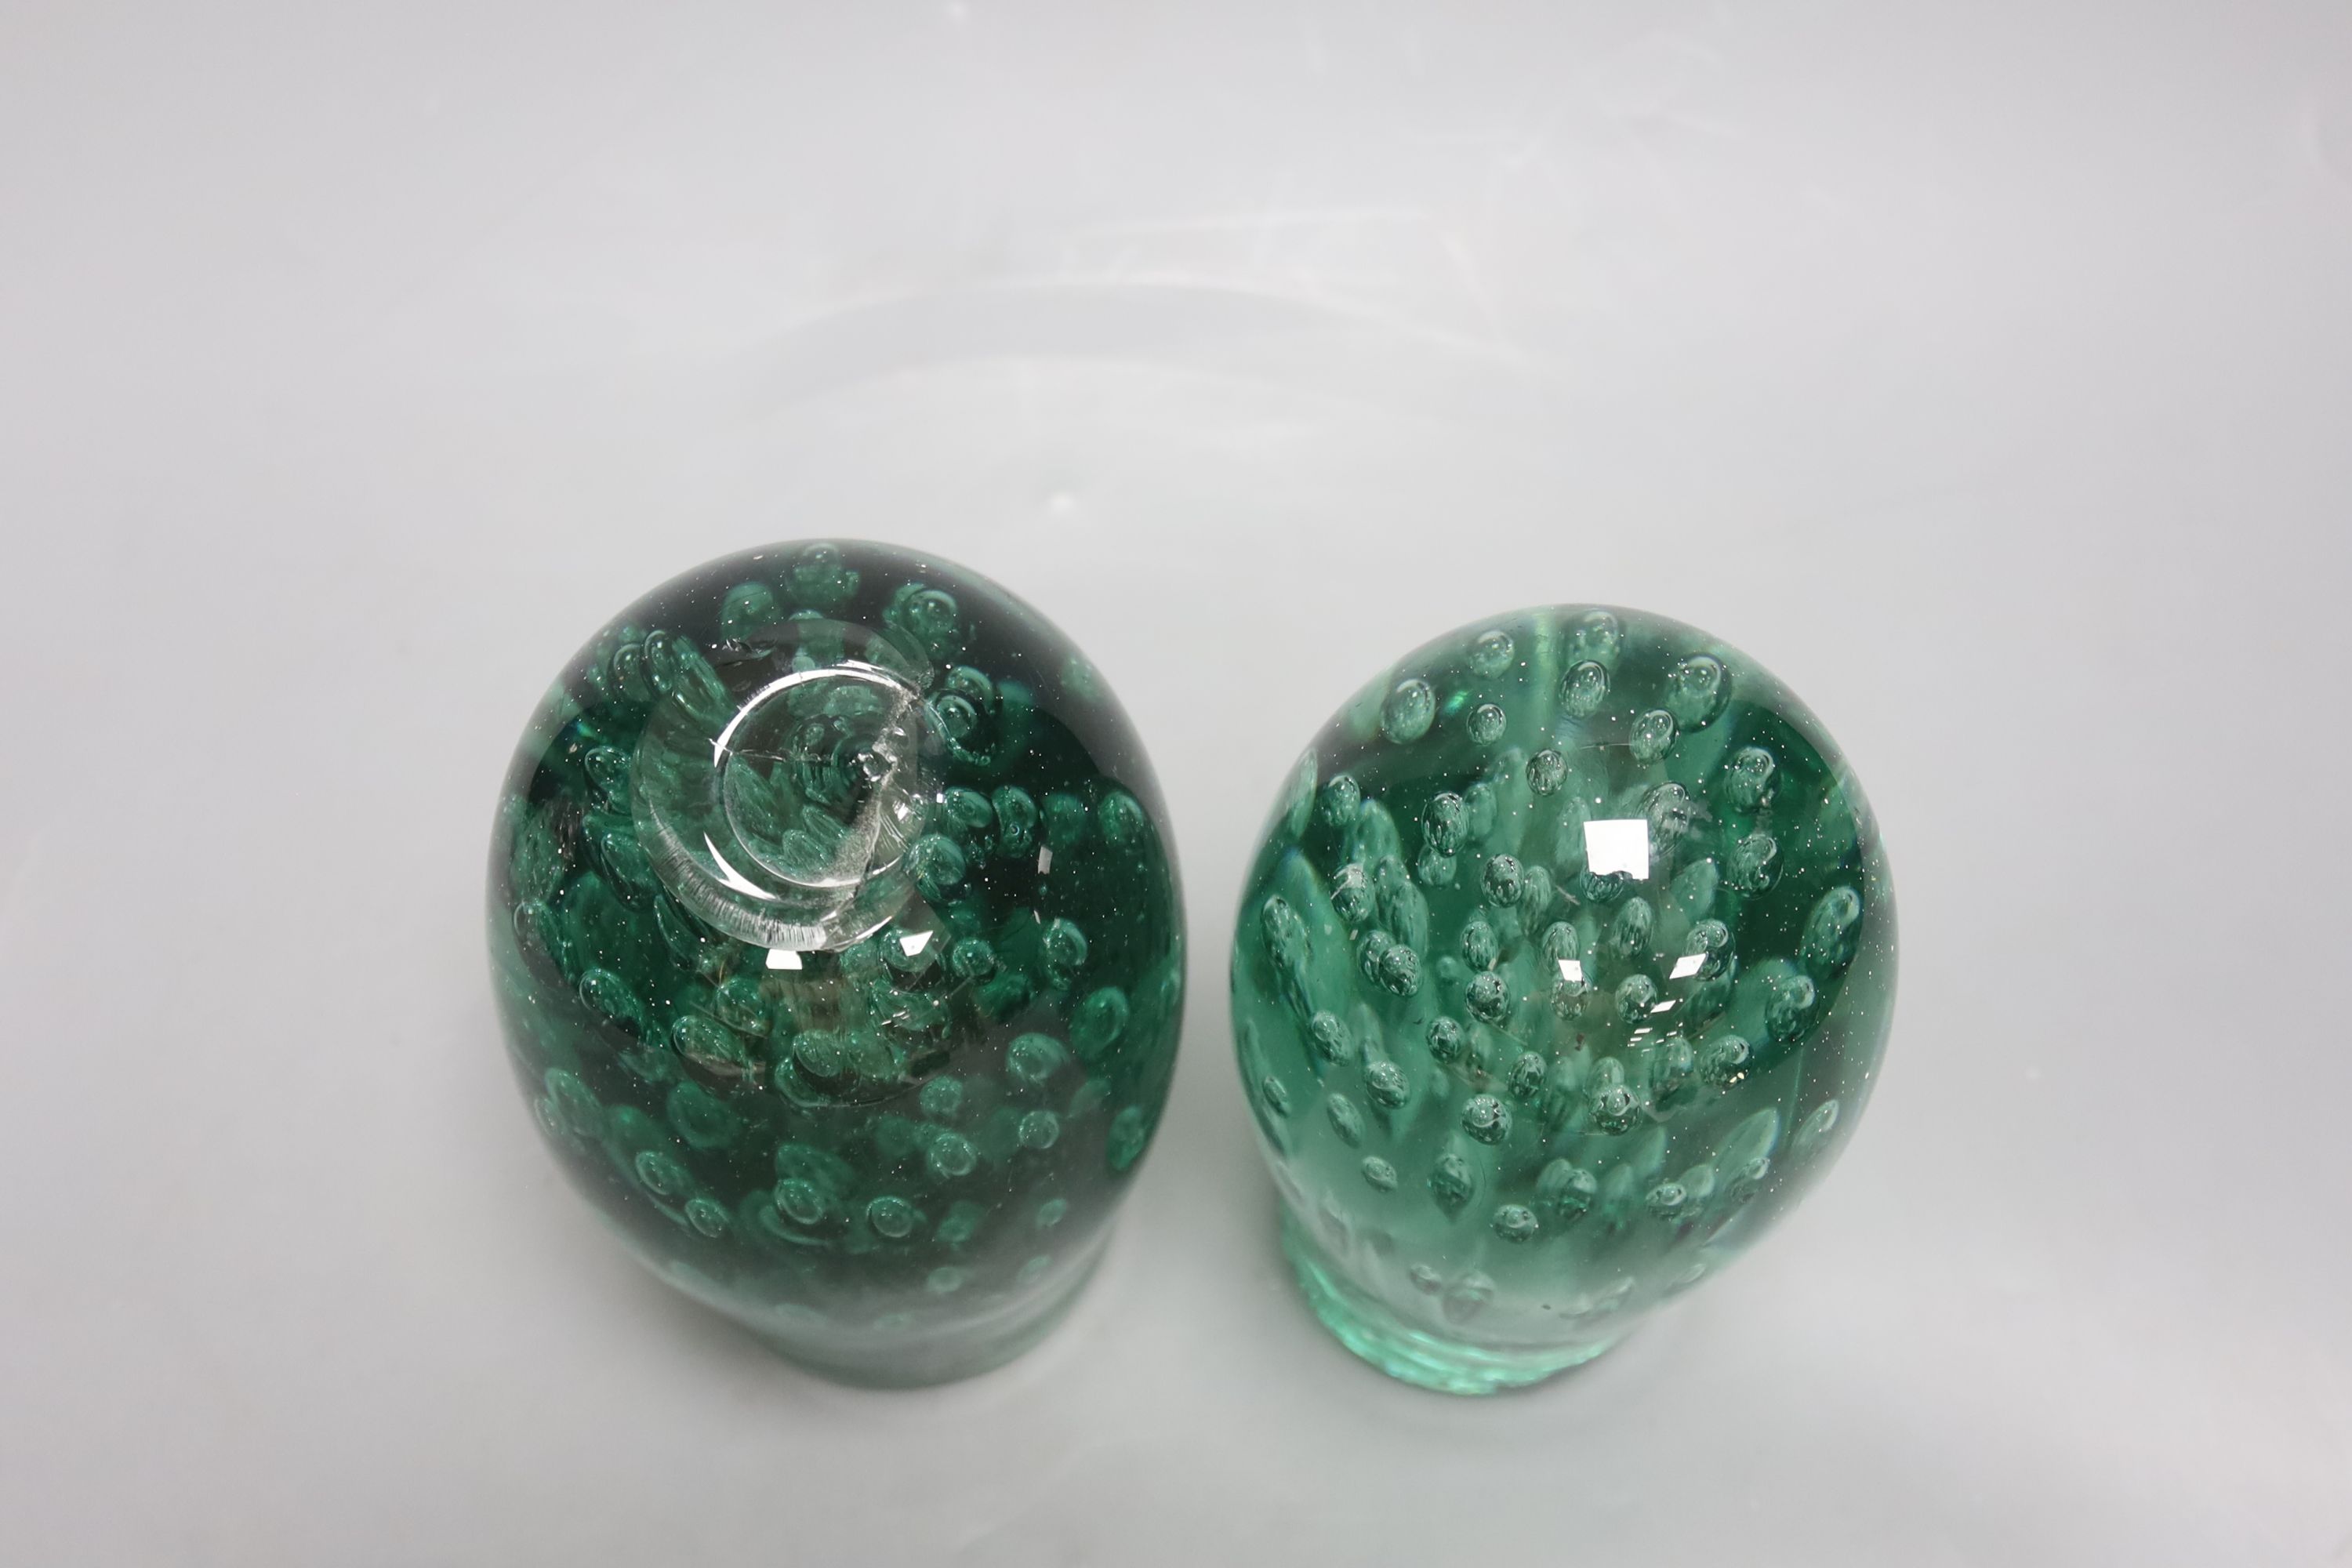 Two green glass dumps, a heavy cut glass bowl and a decanter